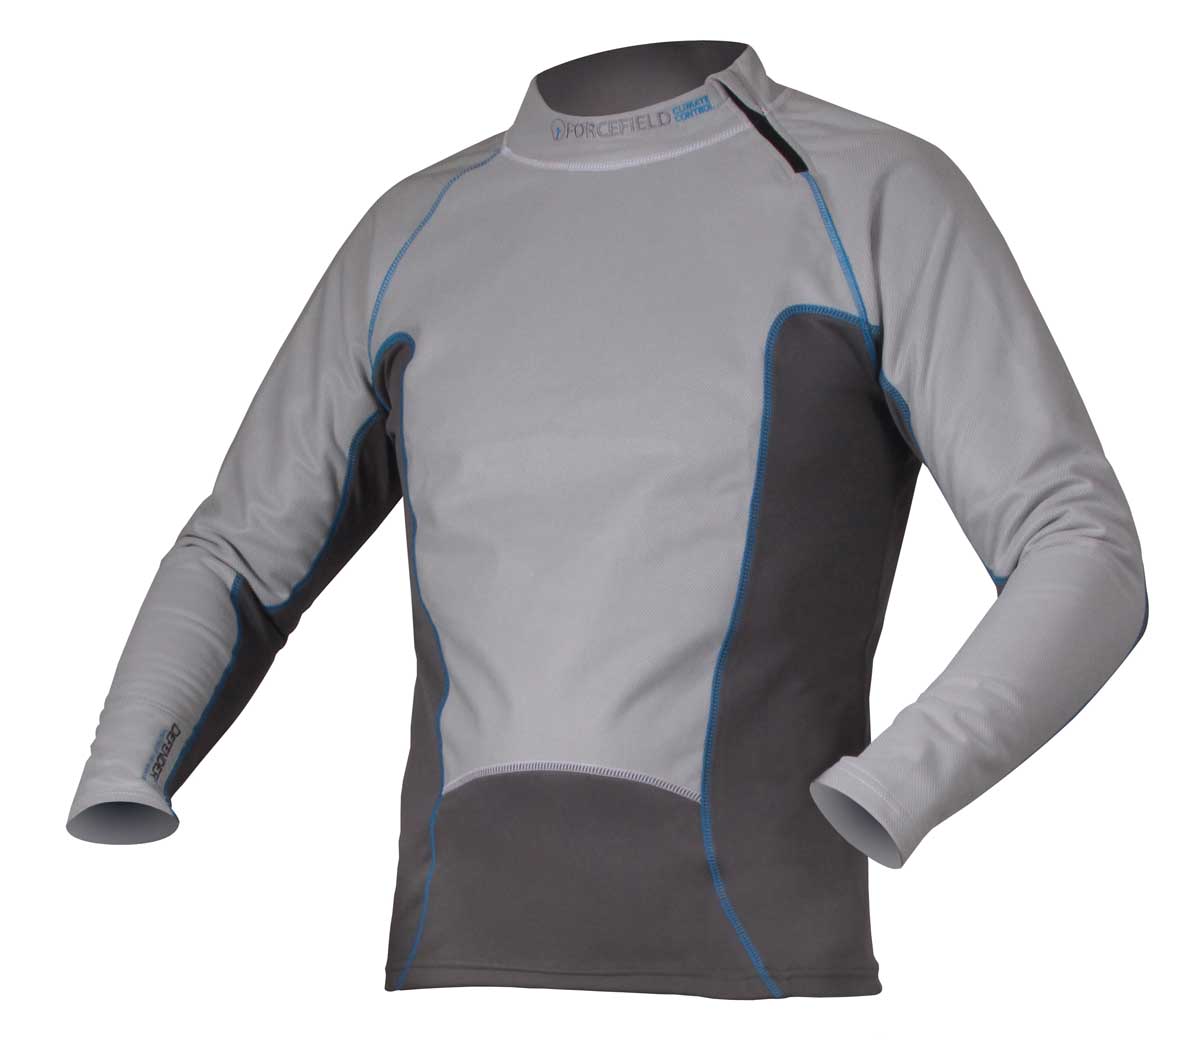 KIT: Forcefield Tornado Advance shirt essential for winter